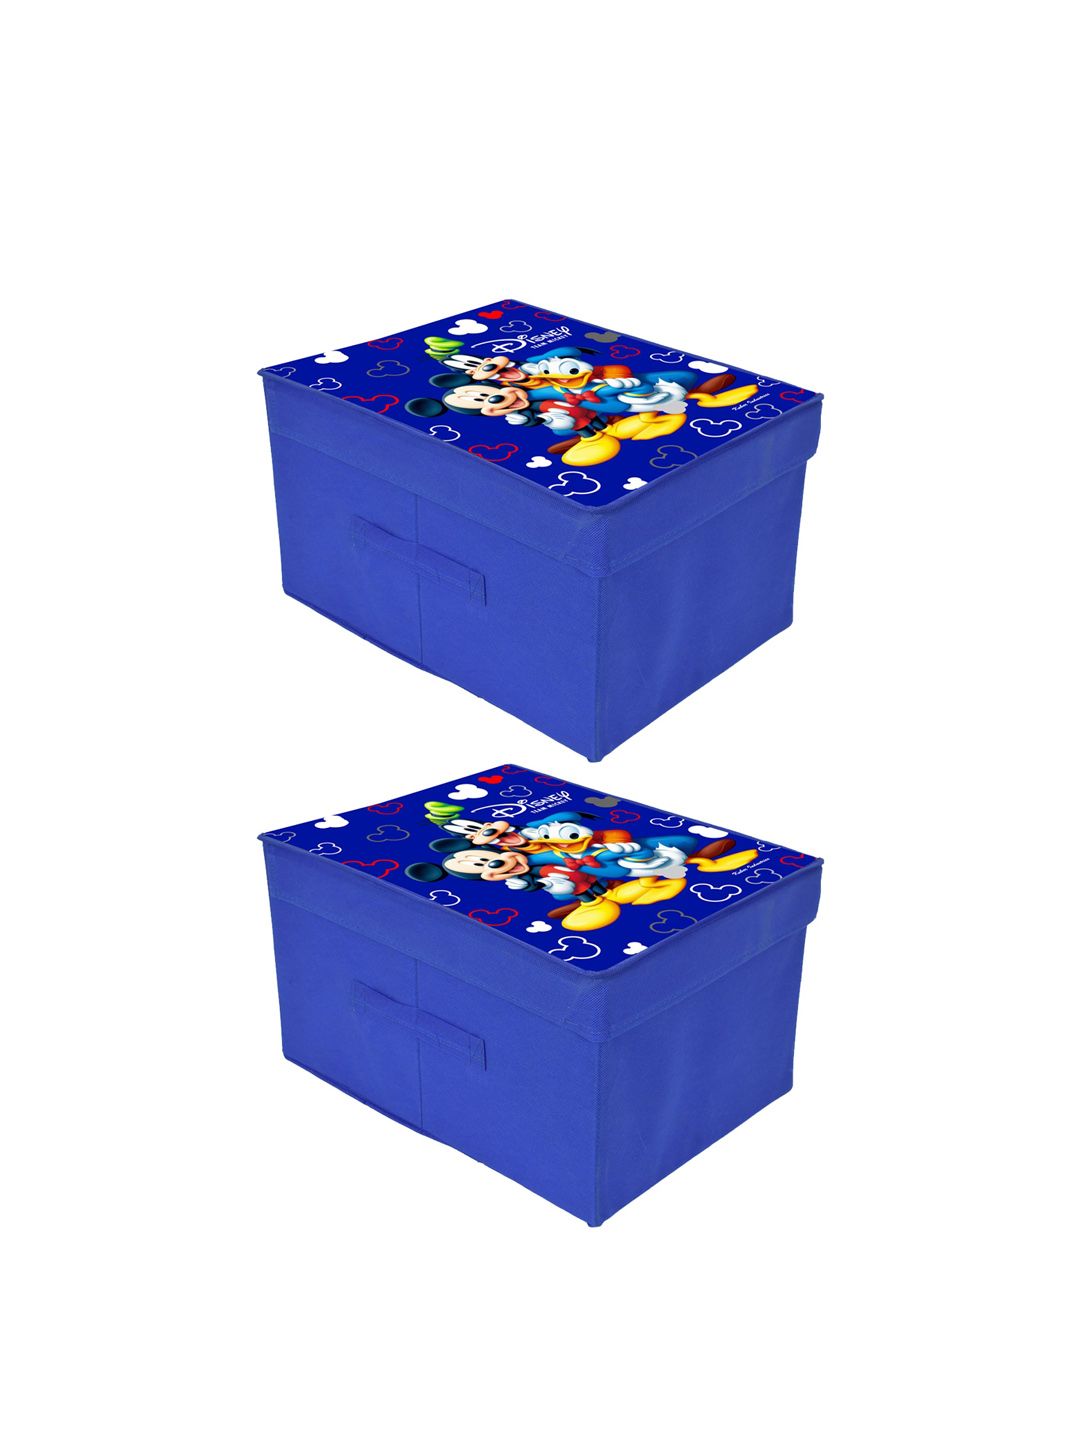 Kuber Industries Set Of 2 Blue Disney Team Mickey Printed Foldable Saree Cover Storage Boxes With Lids Price in India